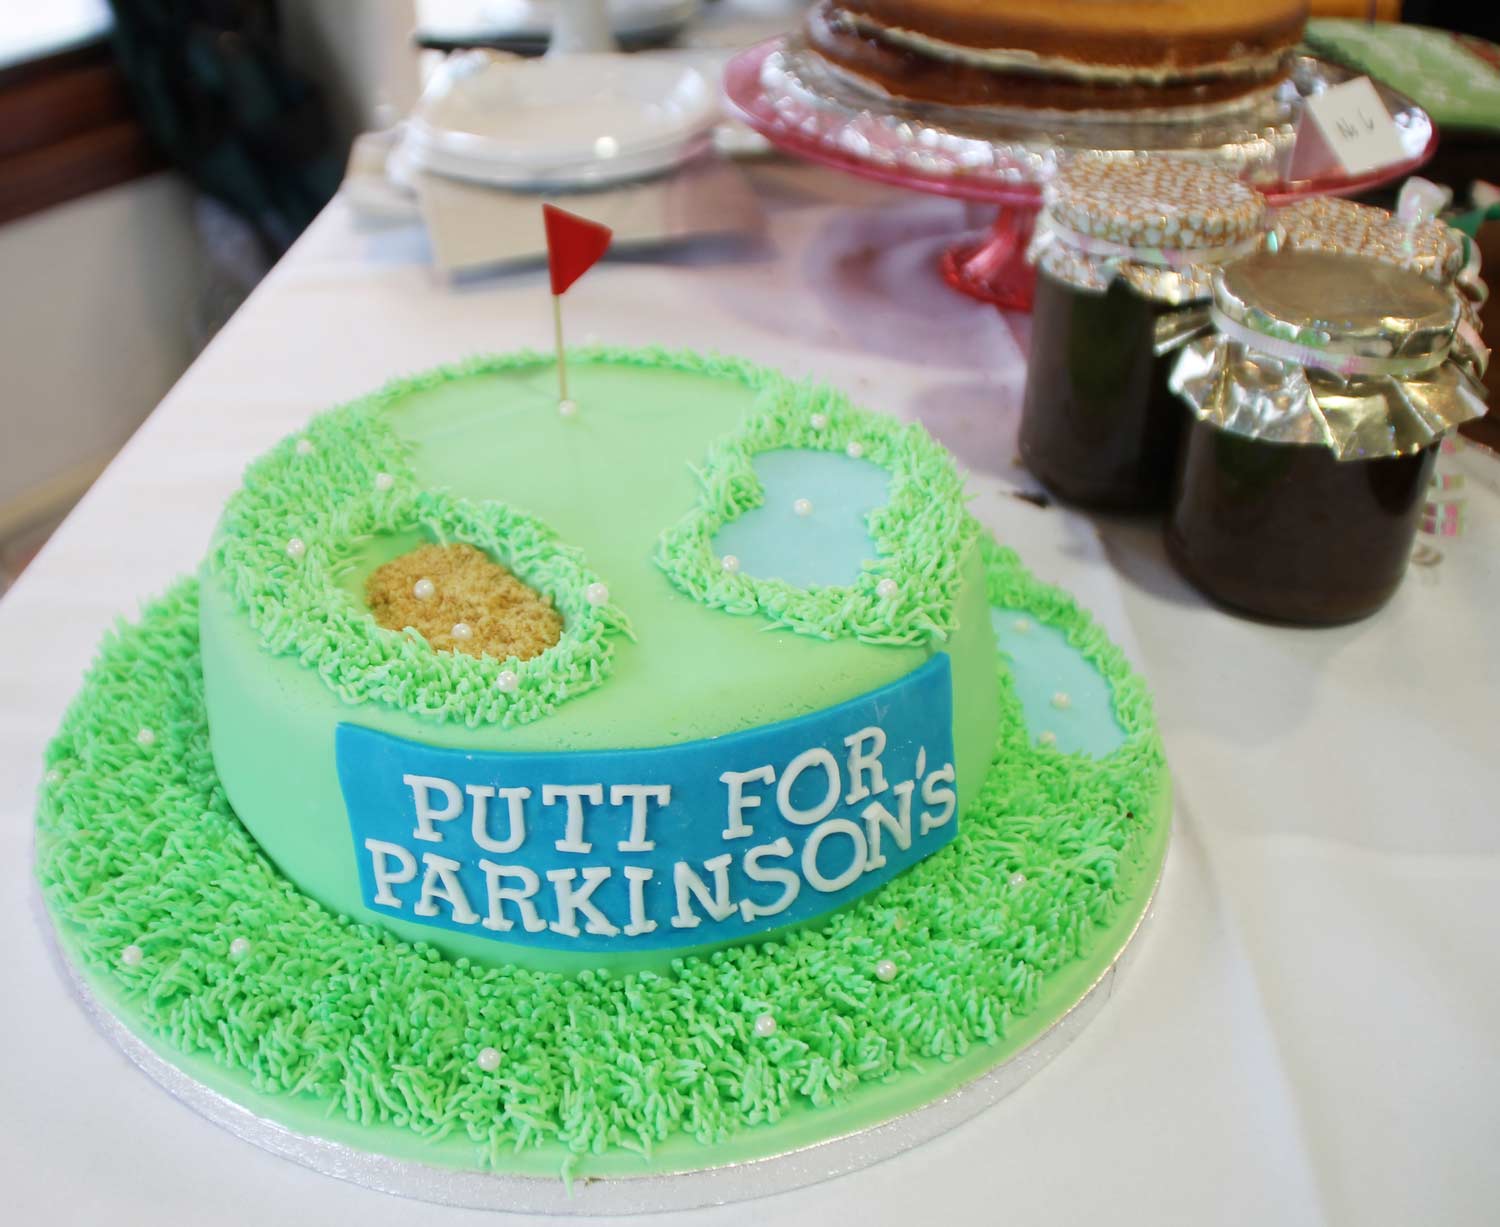 Over 100 people joined this fun event at Rudding Park Golf Academy to help fundraise